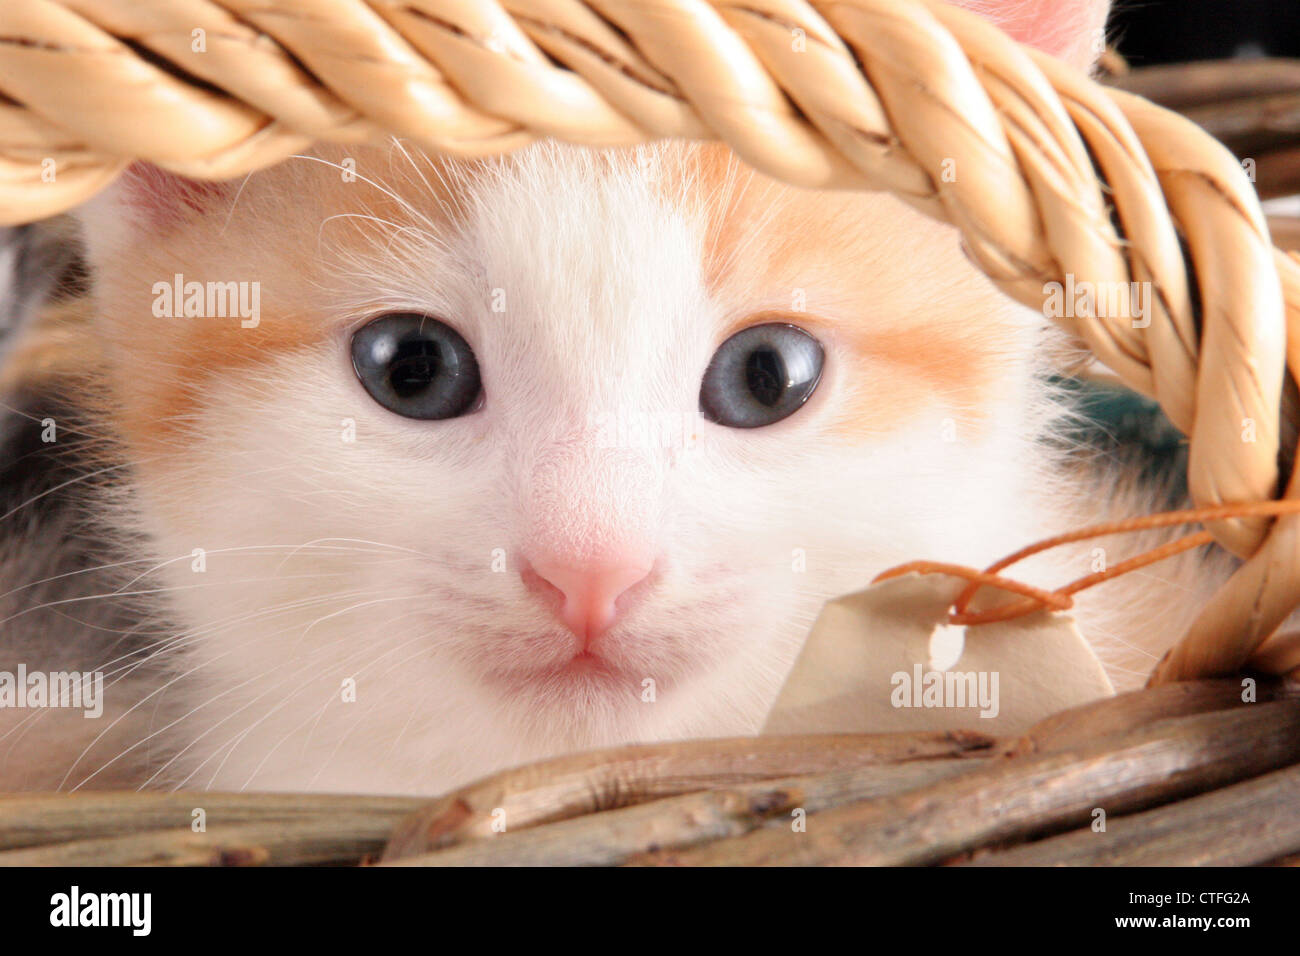 A orange and white kitten hiding in a basket Stock Photo